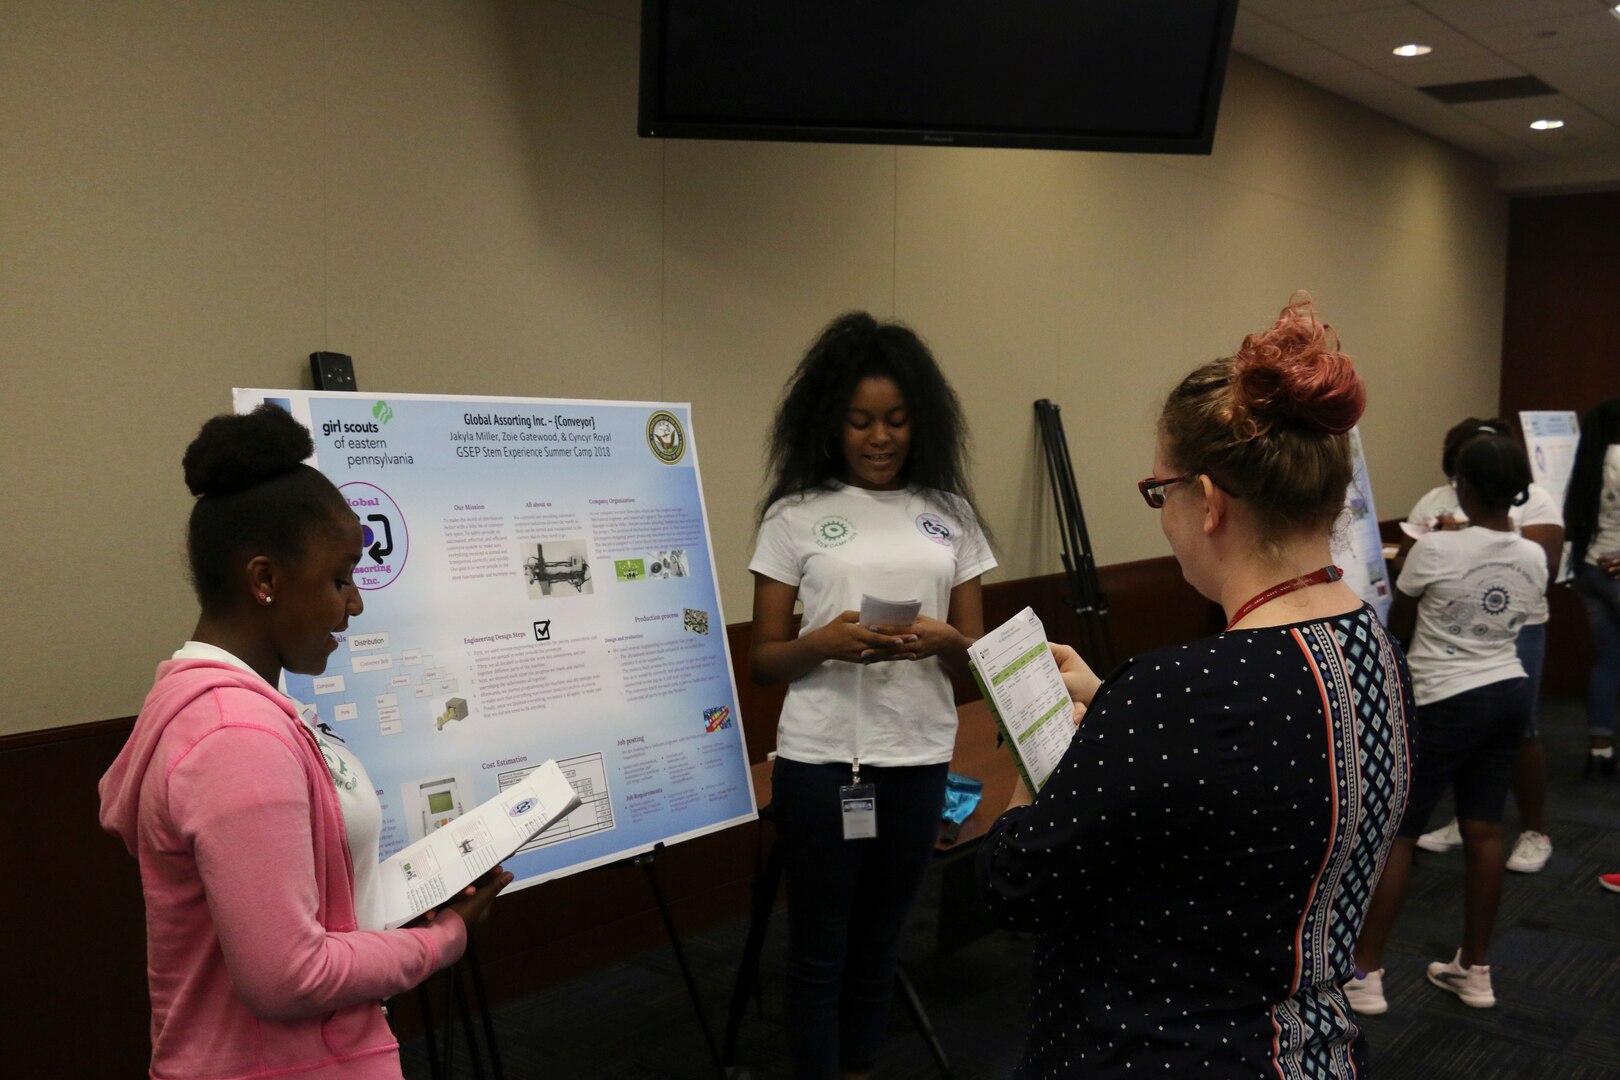 Naval Surface Warfare Center, Philadelphia Division (NSWCPD) employees serve as judges during the 2018 Girl Scouts of Eastern Pennsylvania (GESP) Science, Technology, and Mathematics (STEM) Experience Summer Camp poster session. This year the camp was run virtually through video calls with virtual presentations replacing the poster session. : (U.S. Navy photo by Keegan Rammel/Released)